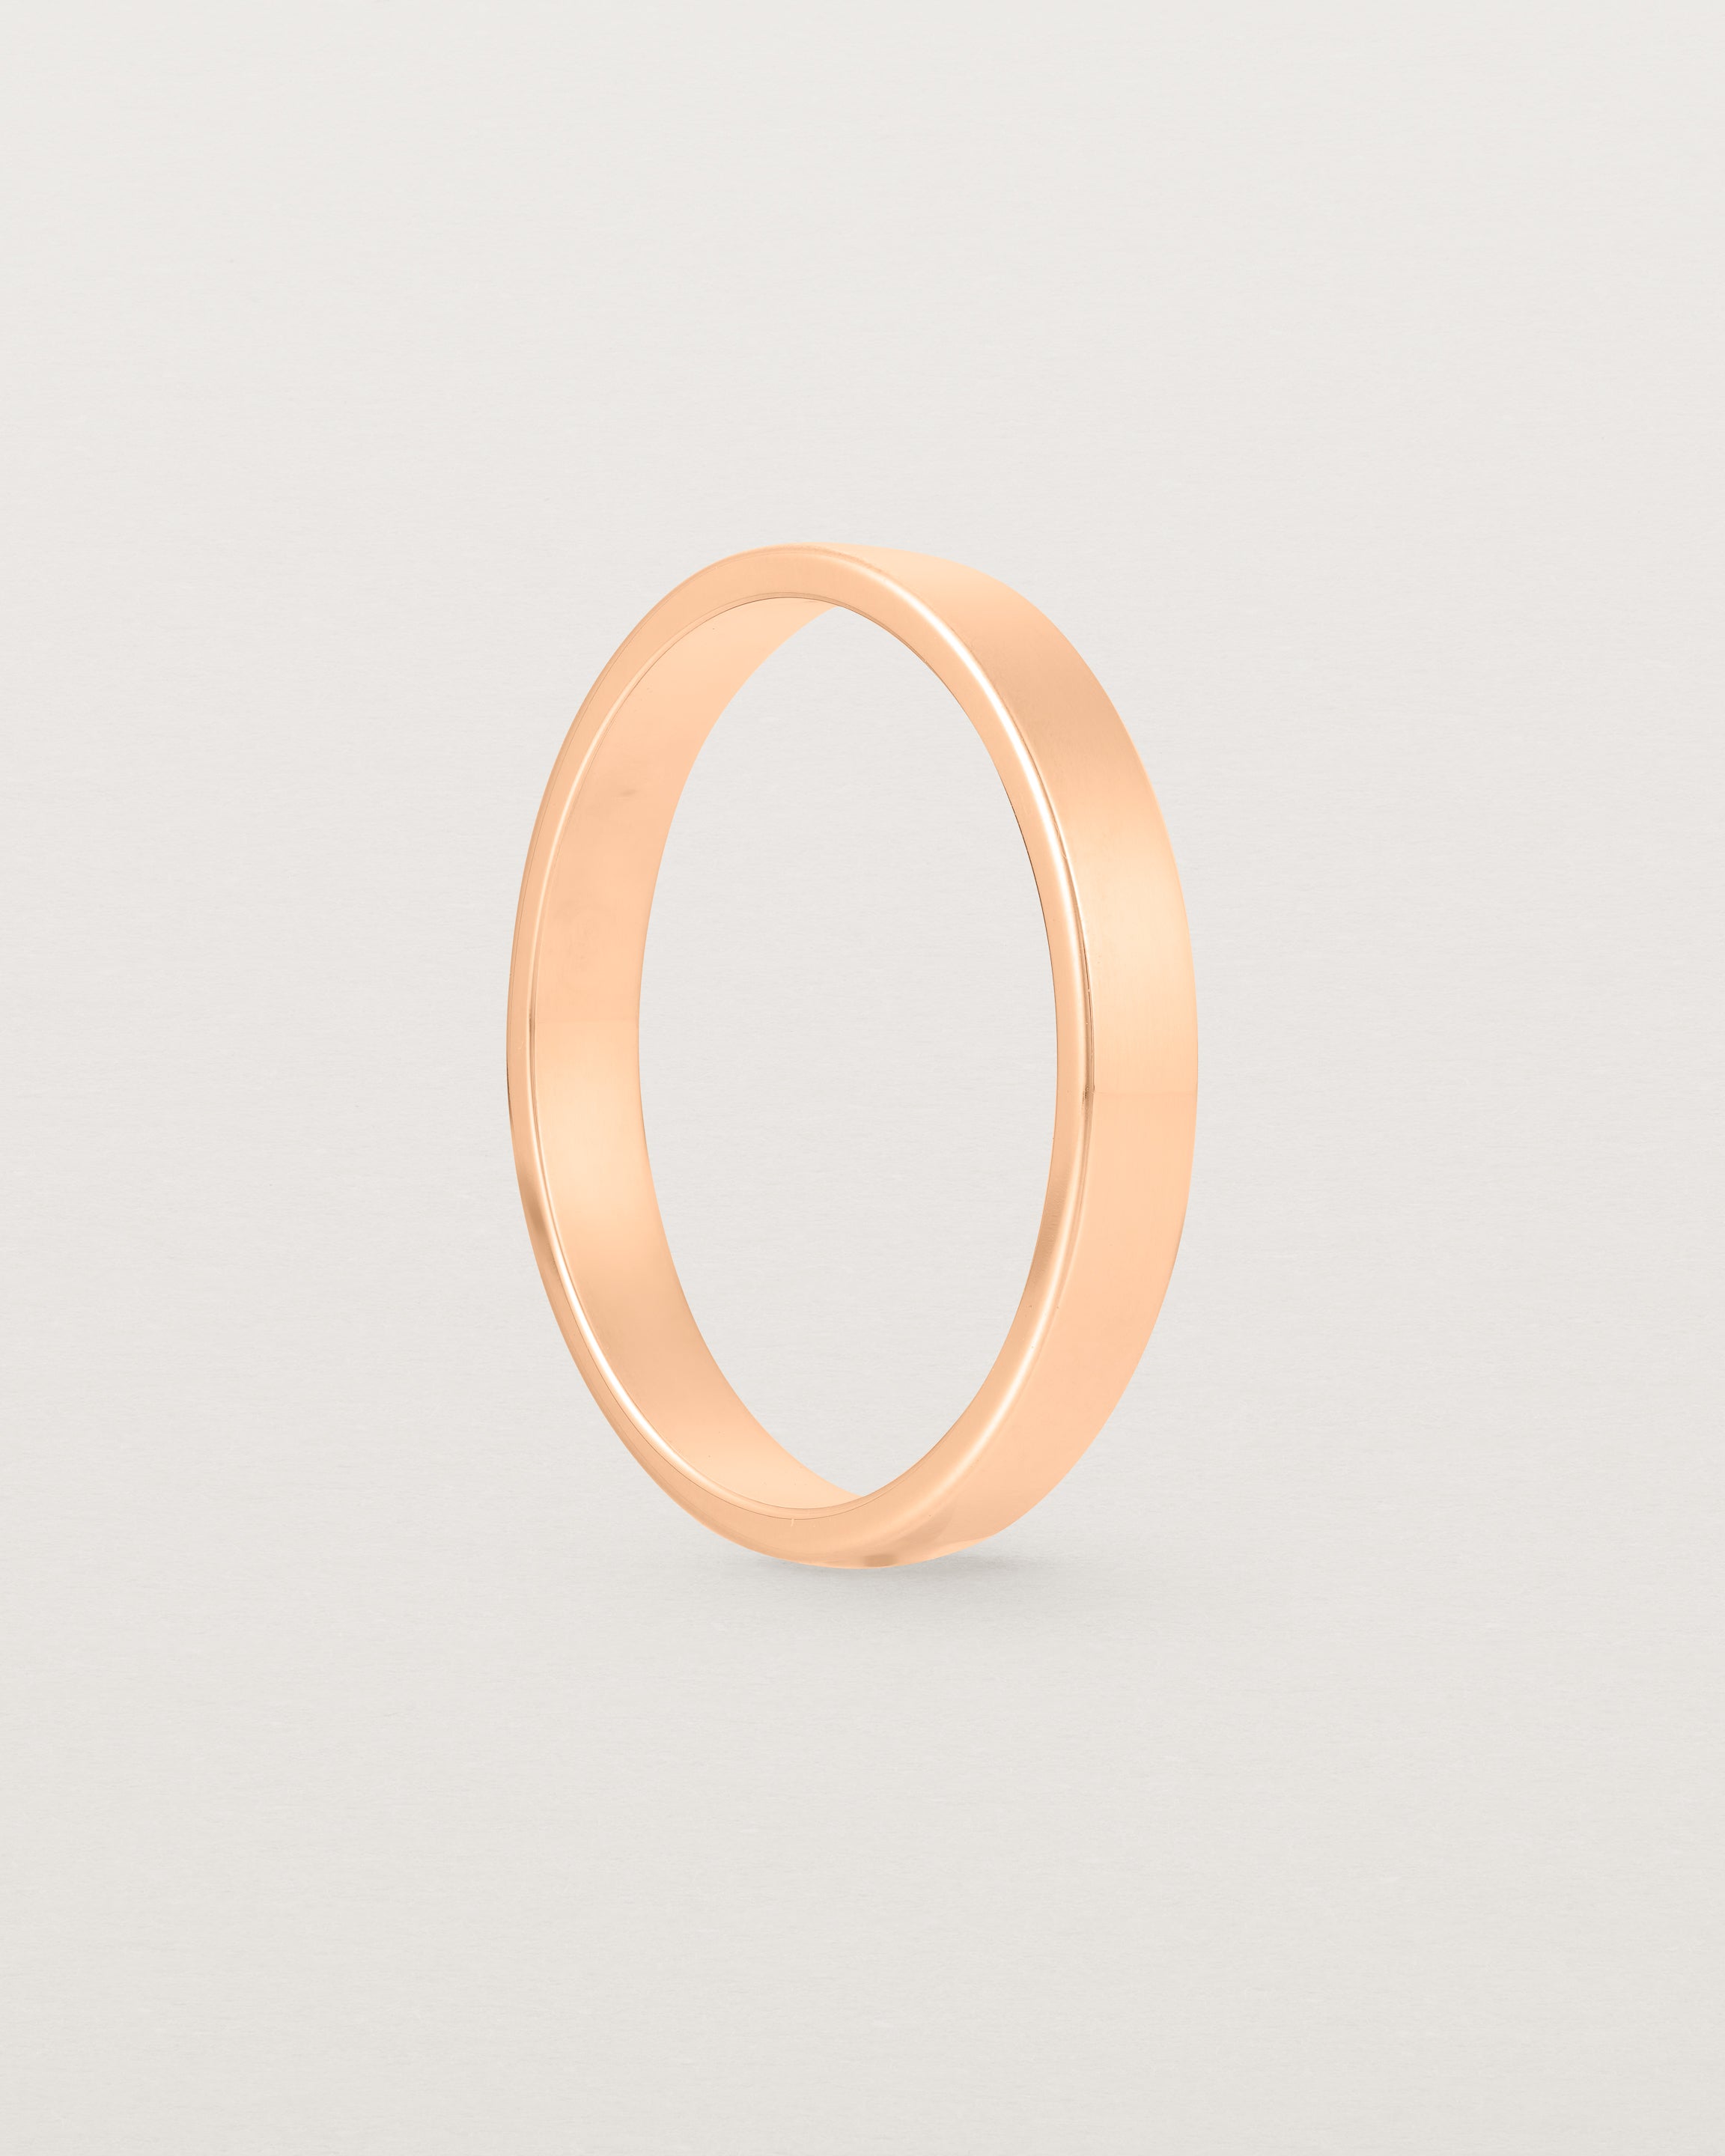 The side profile of our square, flat  3mm profile wedding band crafted in yellow gold